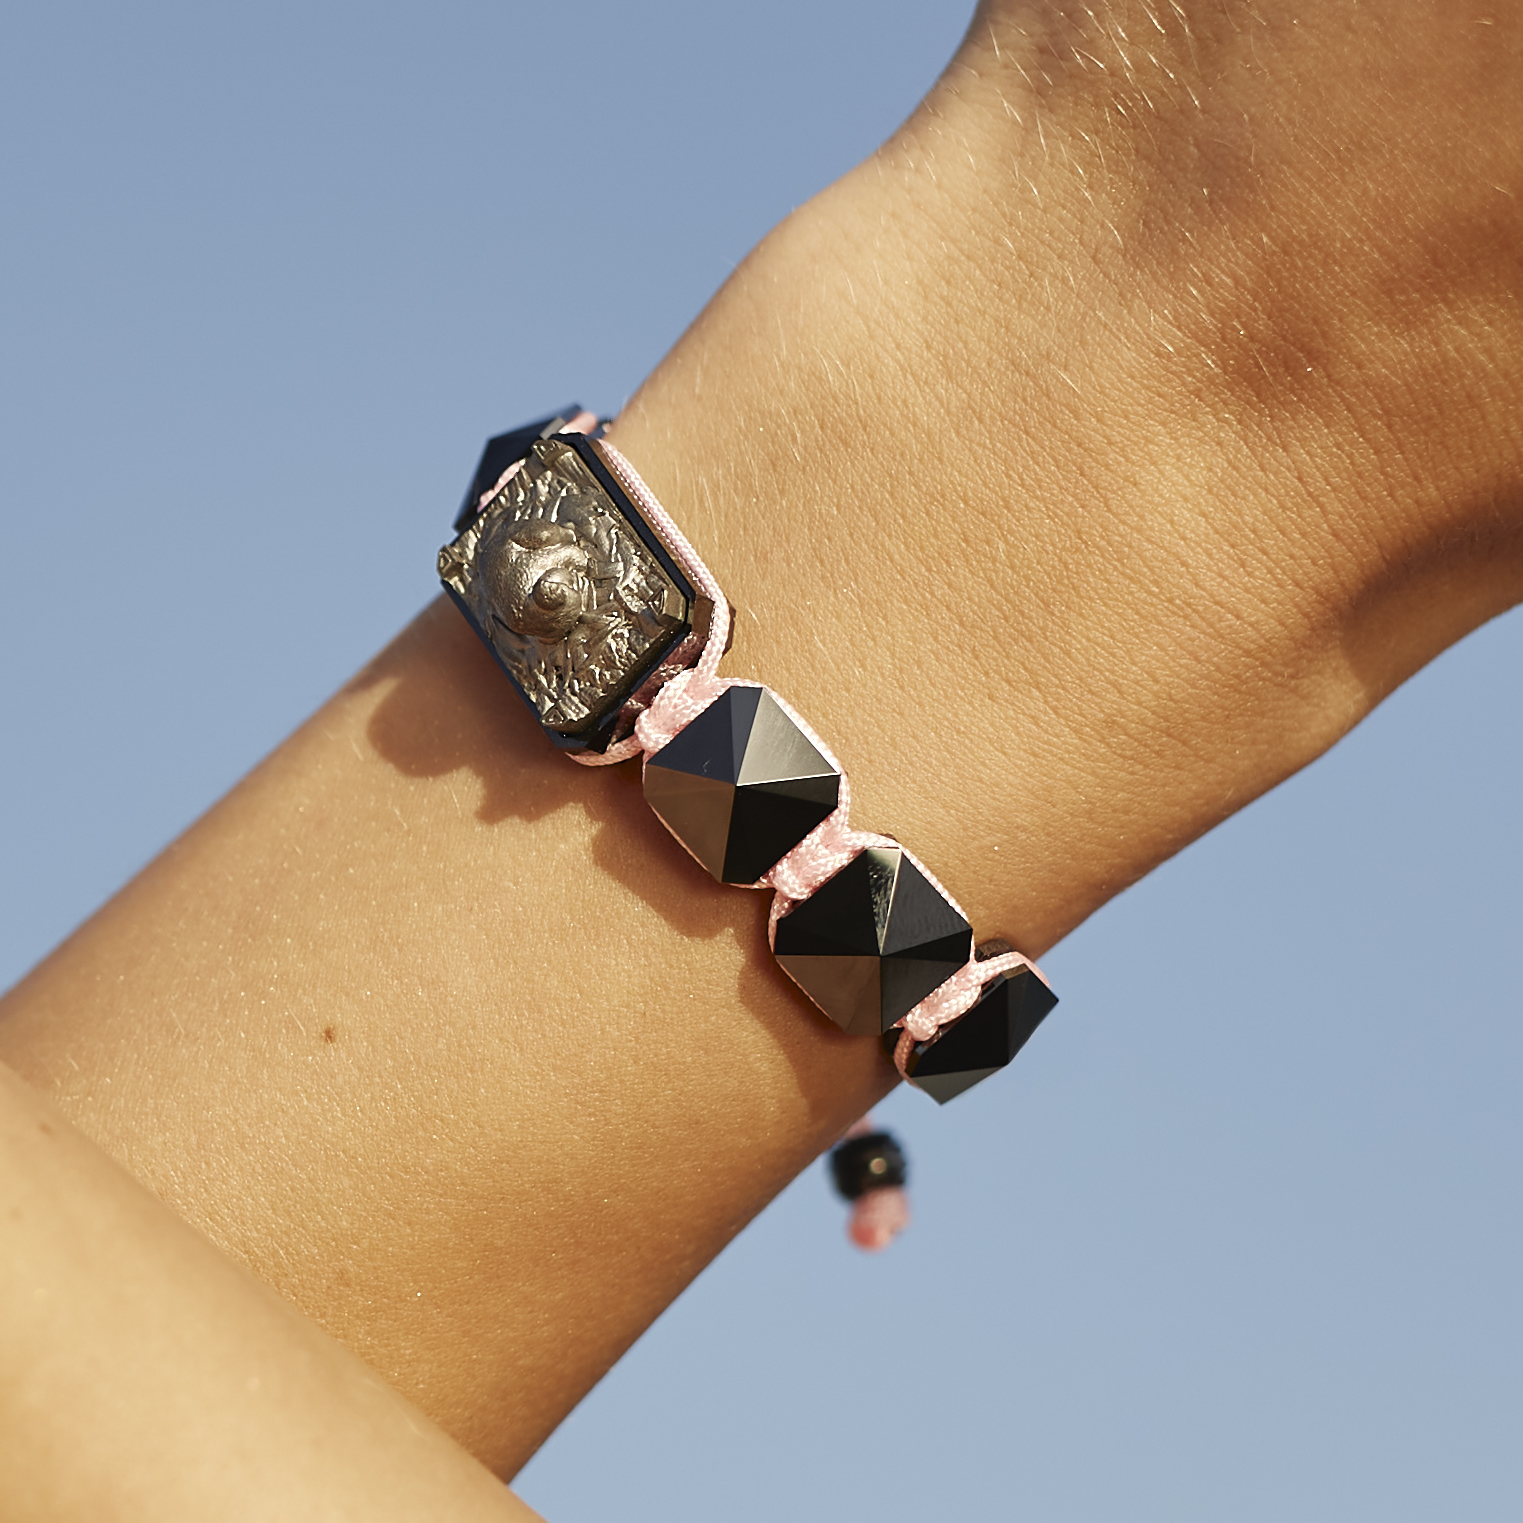 I Love Me bracelet with black ceramic and sculpture finished in anthracite color complemented with a pink coloured cord.